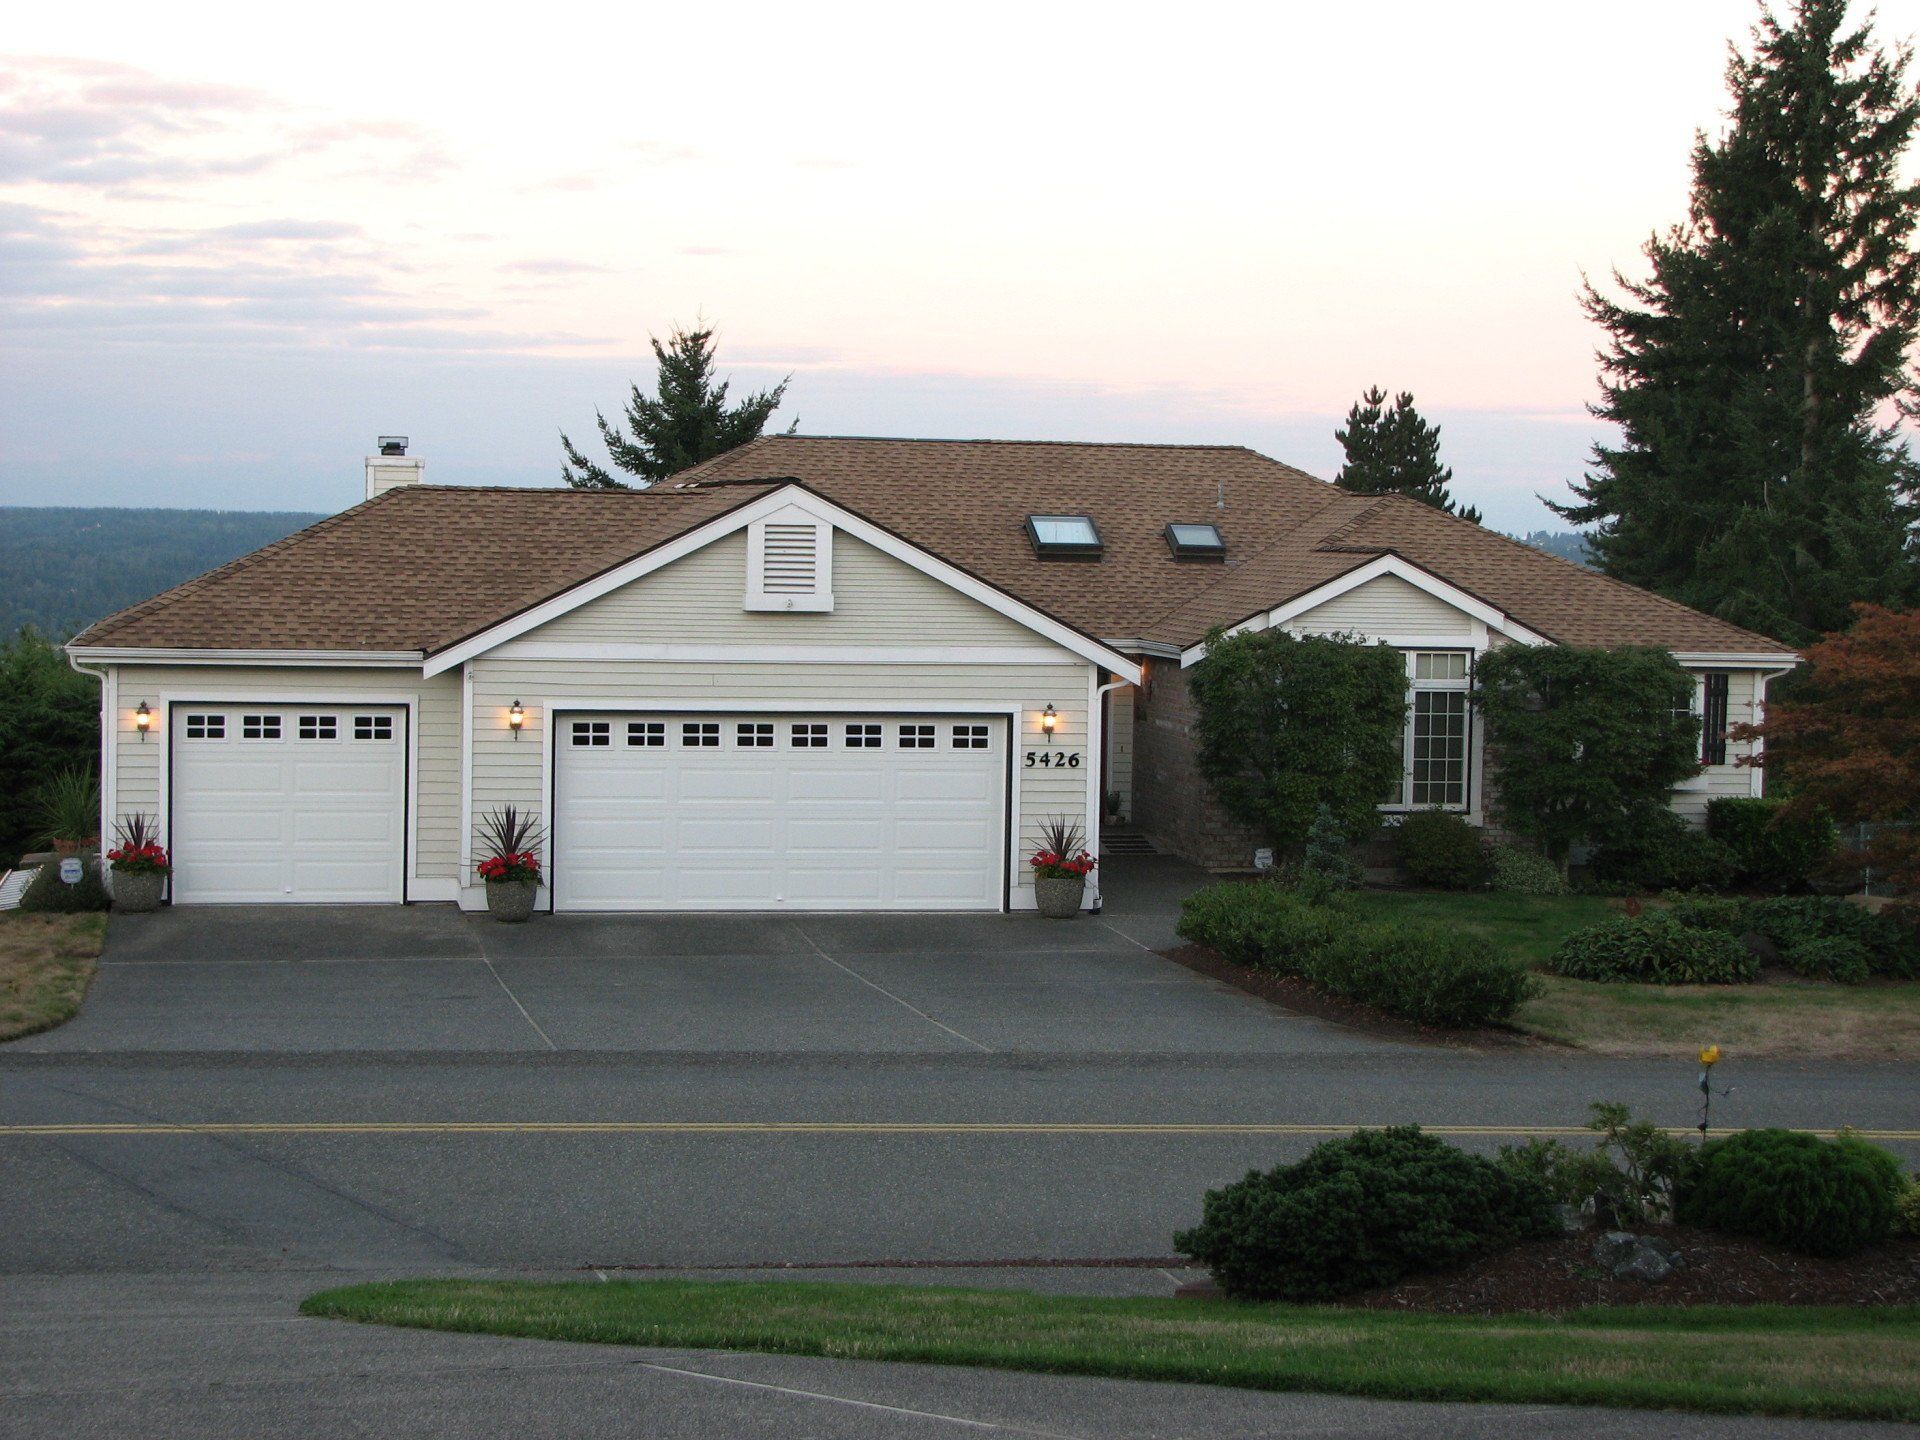 Residential House with Garage — Olalla, WA — Peninsula Roofing LLC